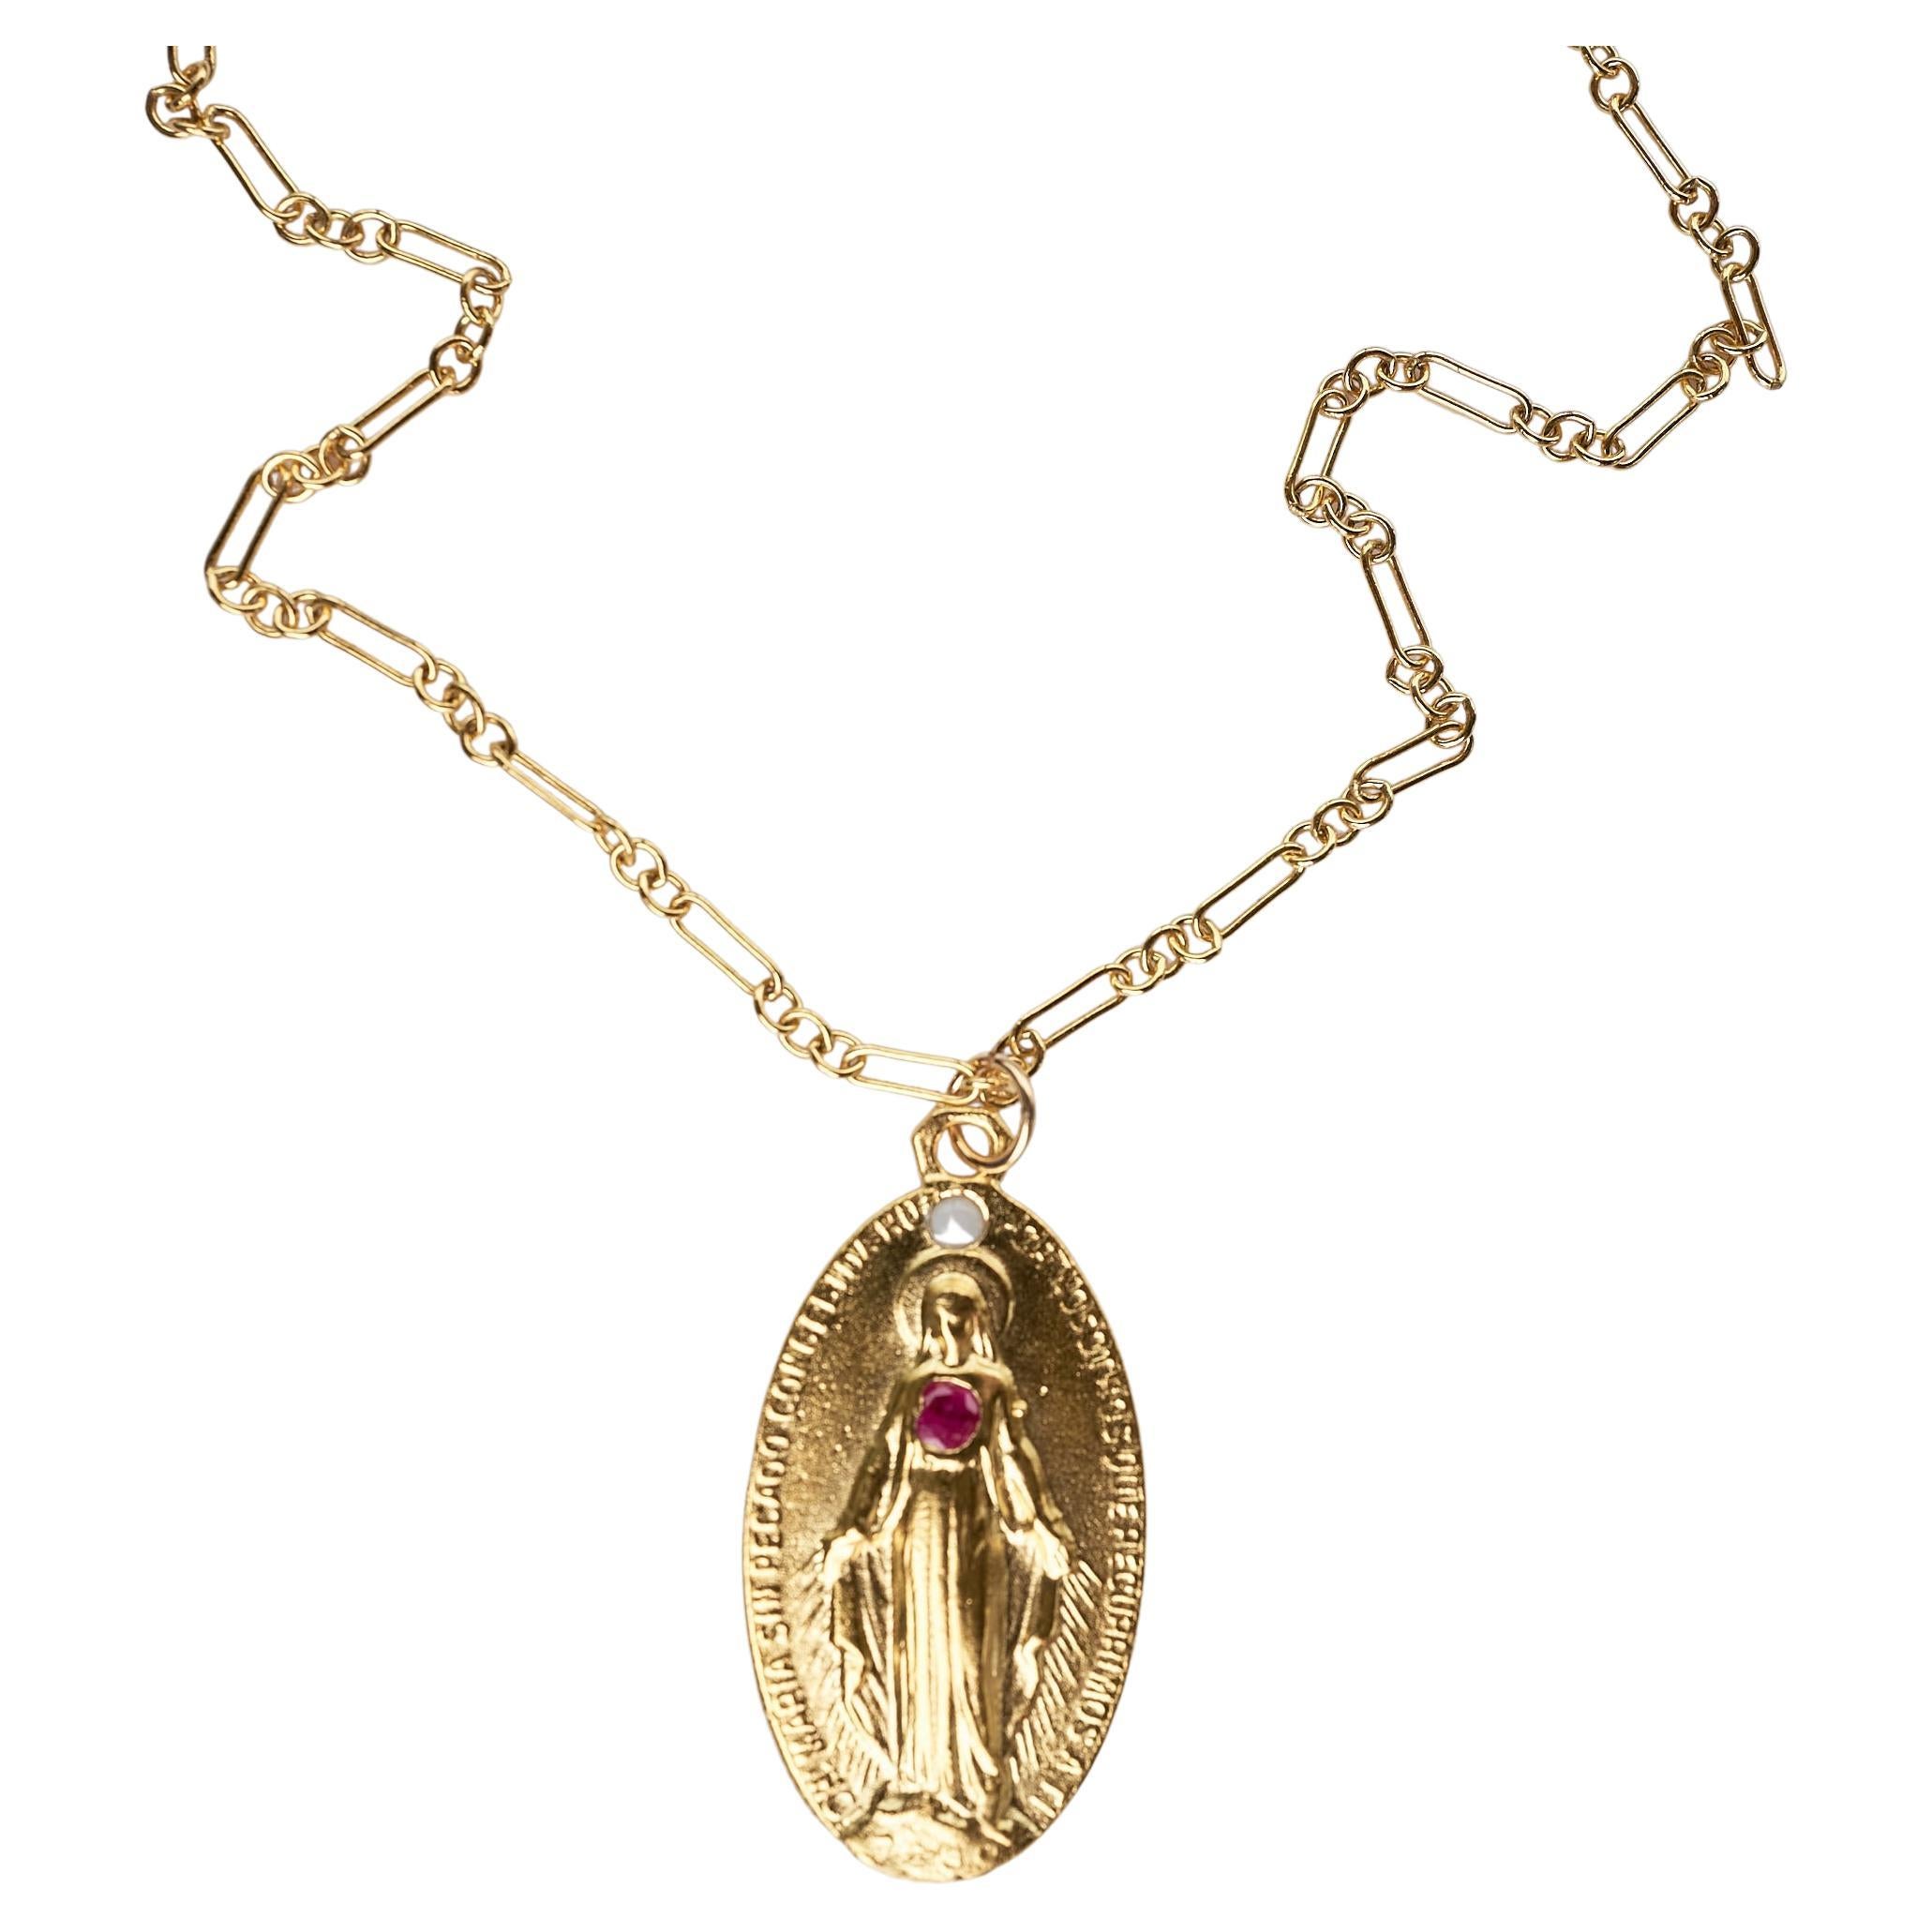 Virgin Mary Medal Chain Necklace Ruby Opal J Dauphin

Gold Plated Medal and Gold Filled Chain 24